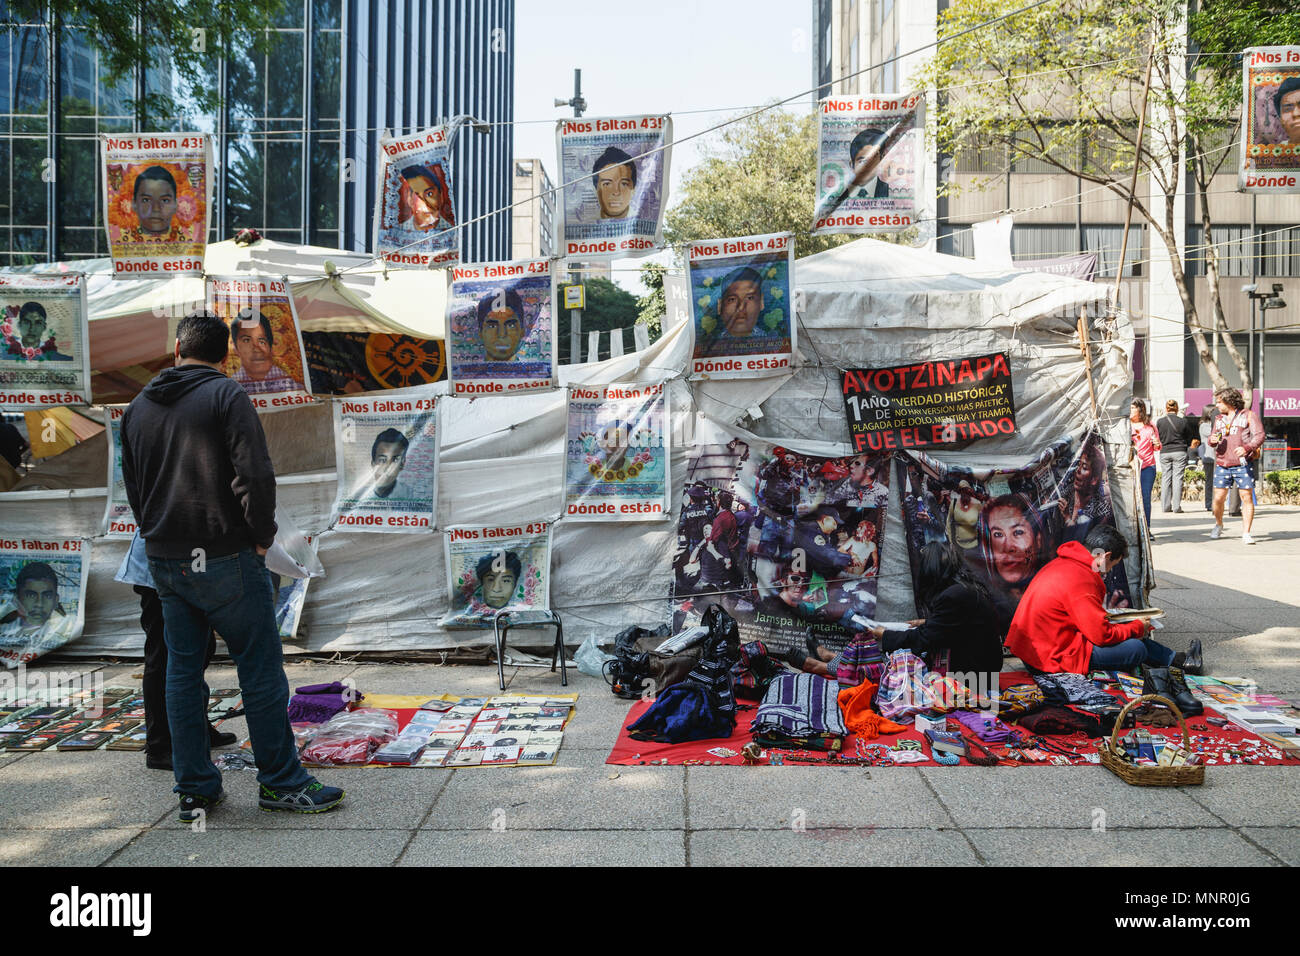 Iguala mass kiddnapping case activists camping site on Tase de la Reforma, shares the space with local street venders, Mexico City, Mexico. Stock Photo